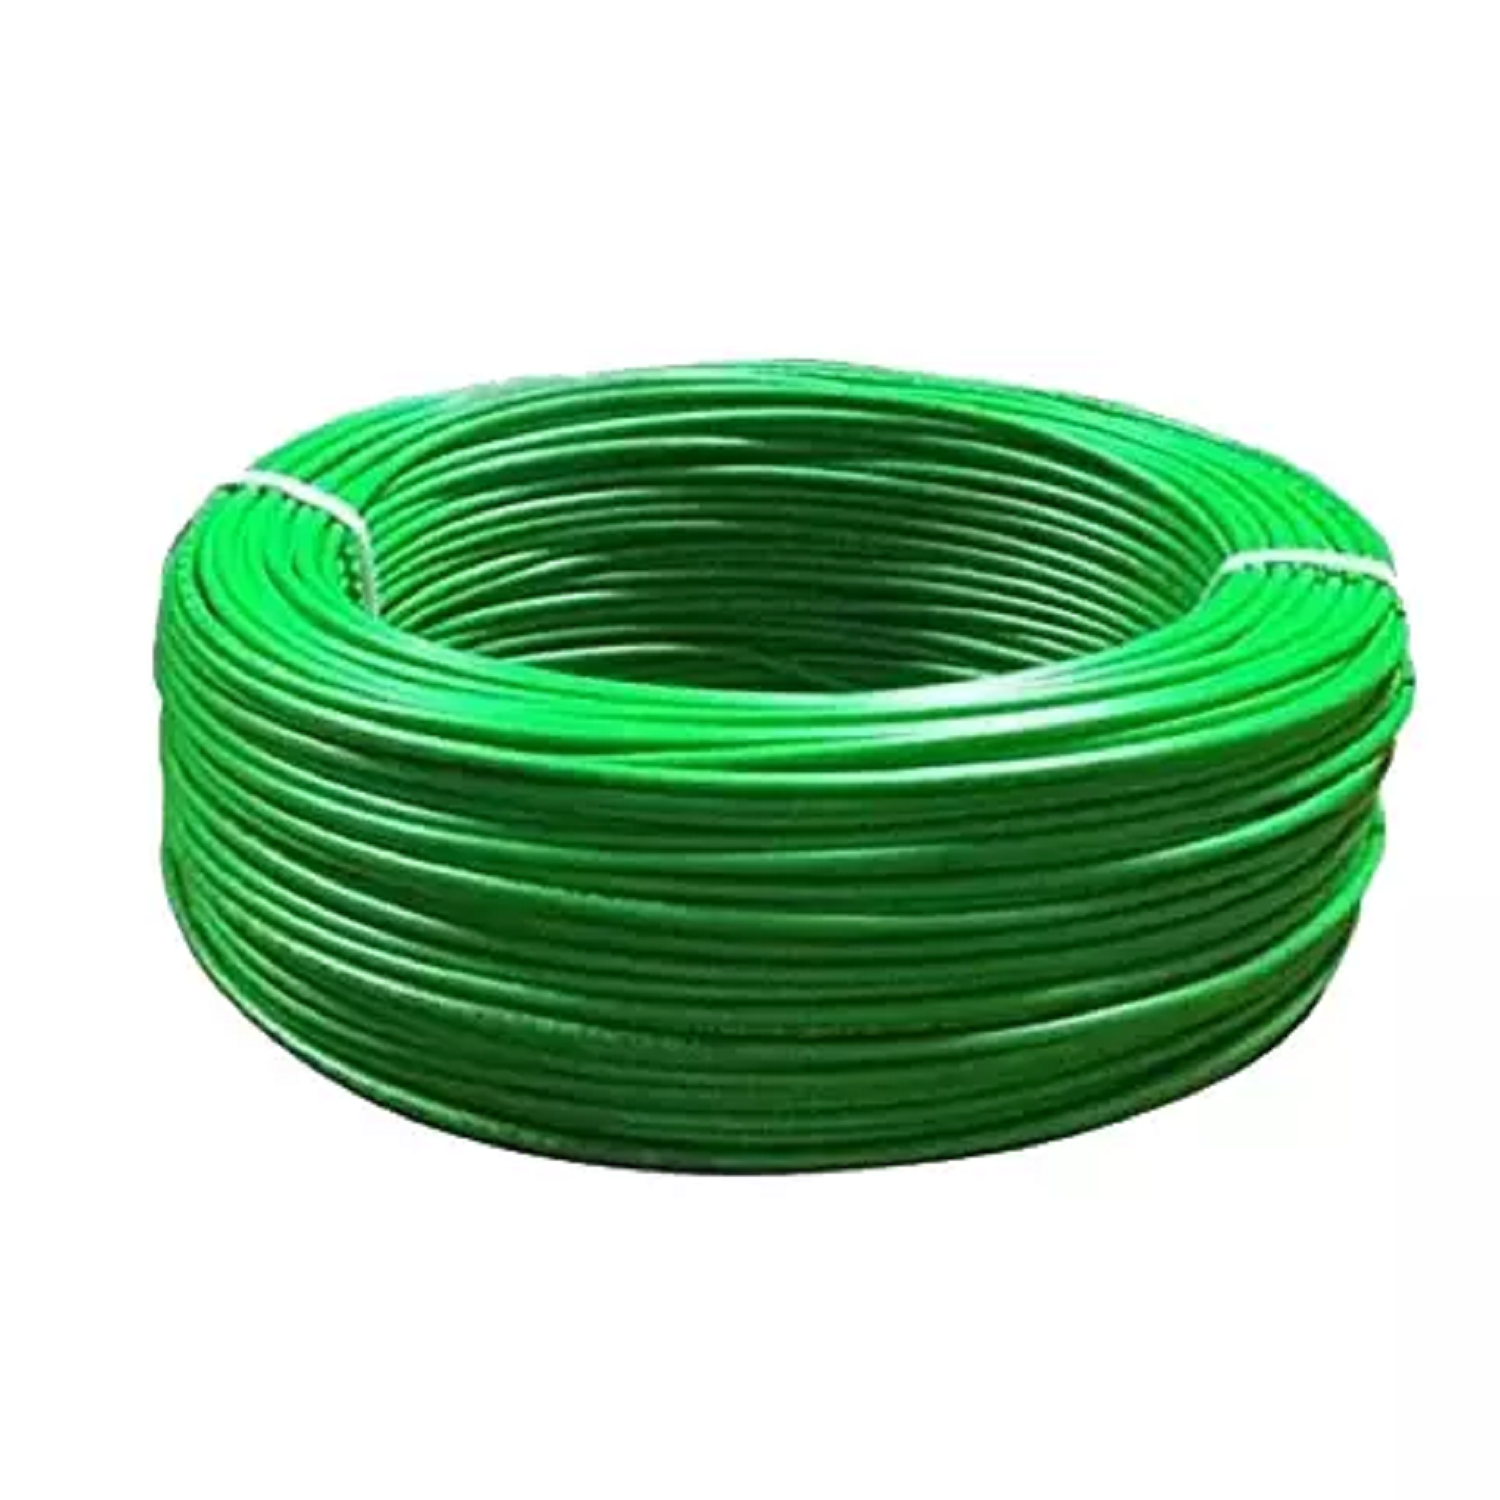 1.0 Sqmm RR FR Single Core Copper Wire (180 Mtr) With PVC Insulated for Domestic 38 Industrial Uses 